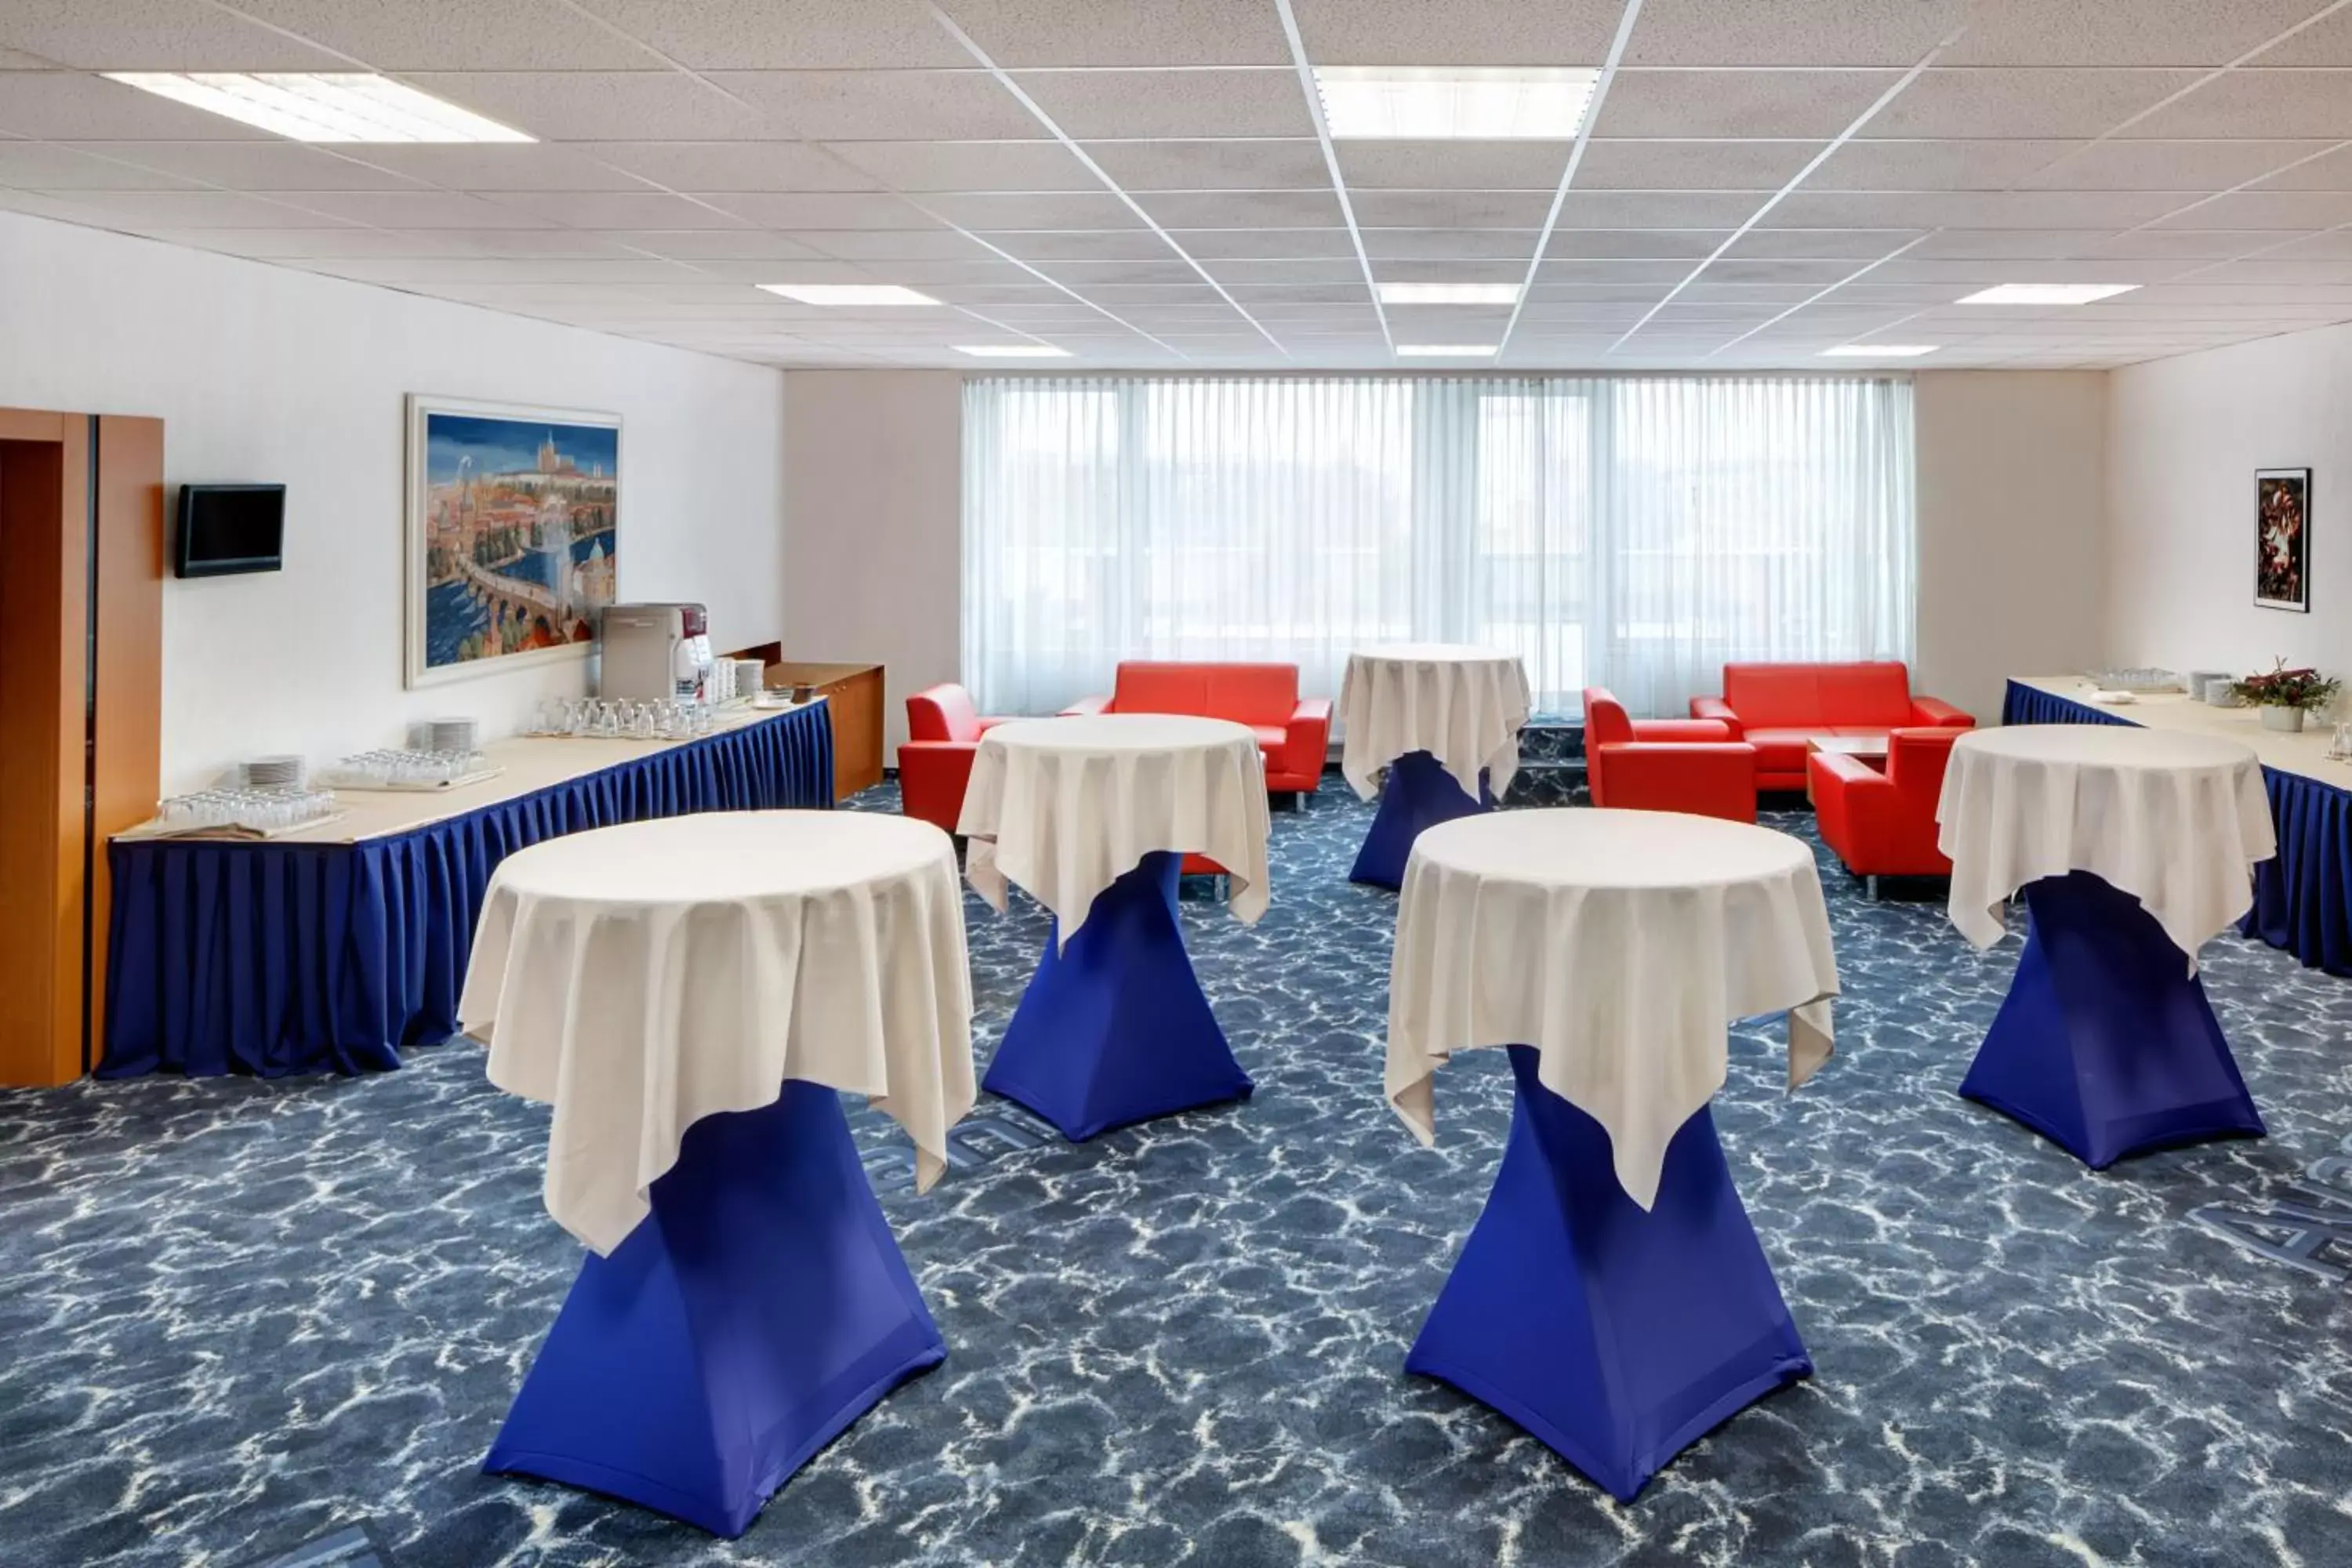 Meeting/conference room in Avanti Hotel